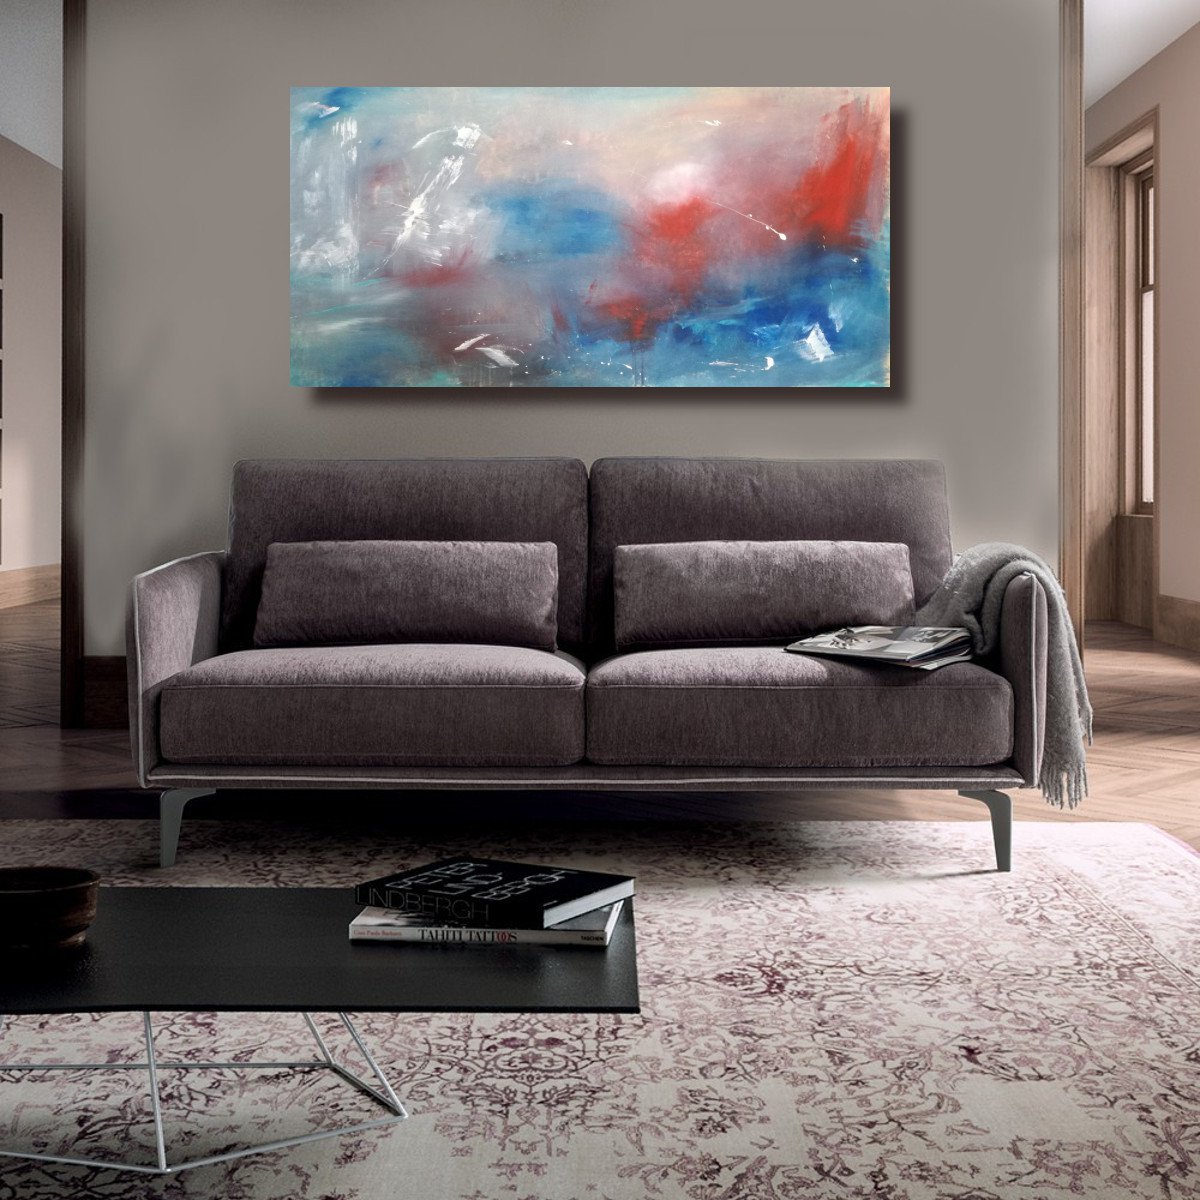 large abstract painting size- 120x60 cm (47,3x23,7x1,6) title c629 by Sauro Bos